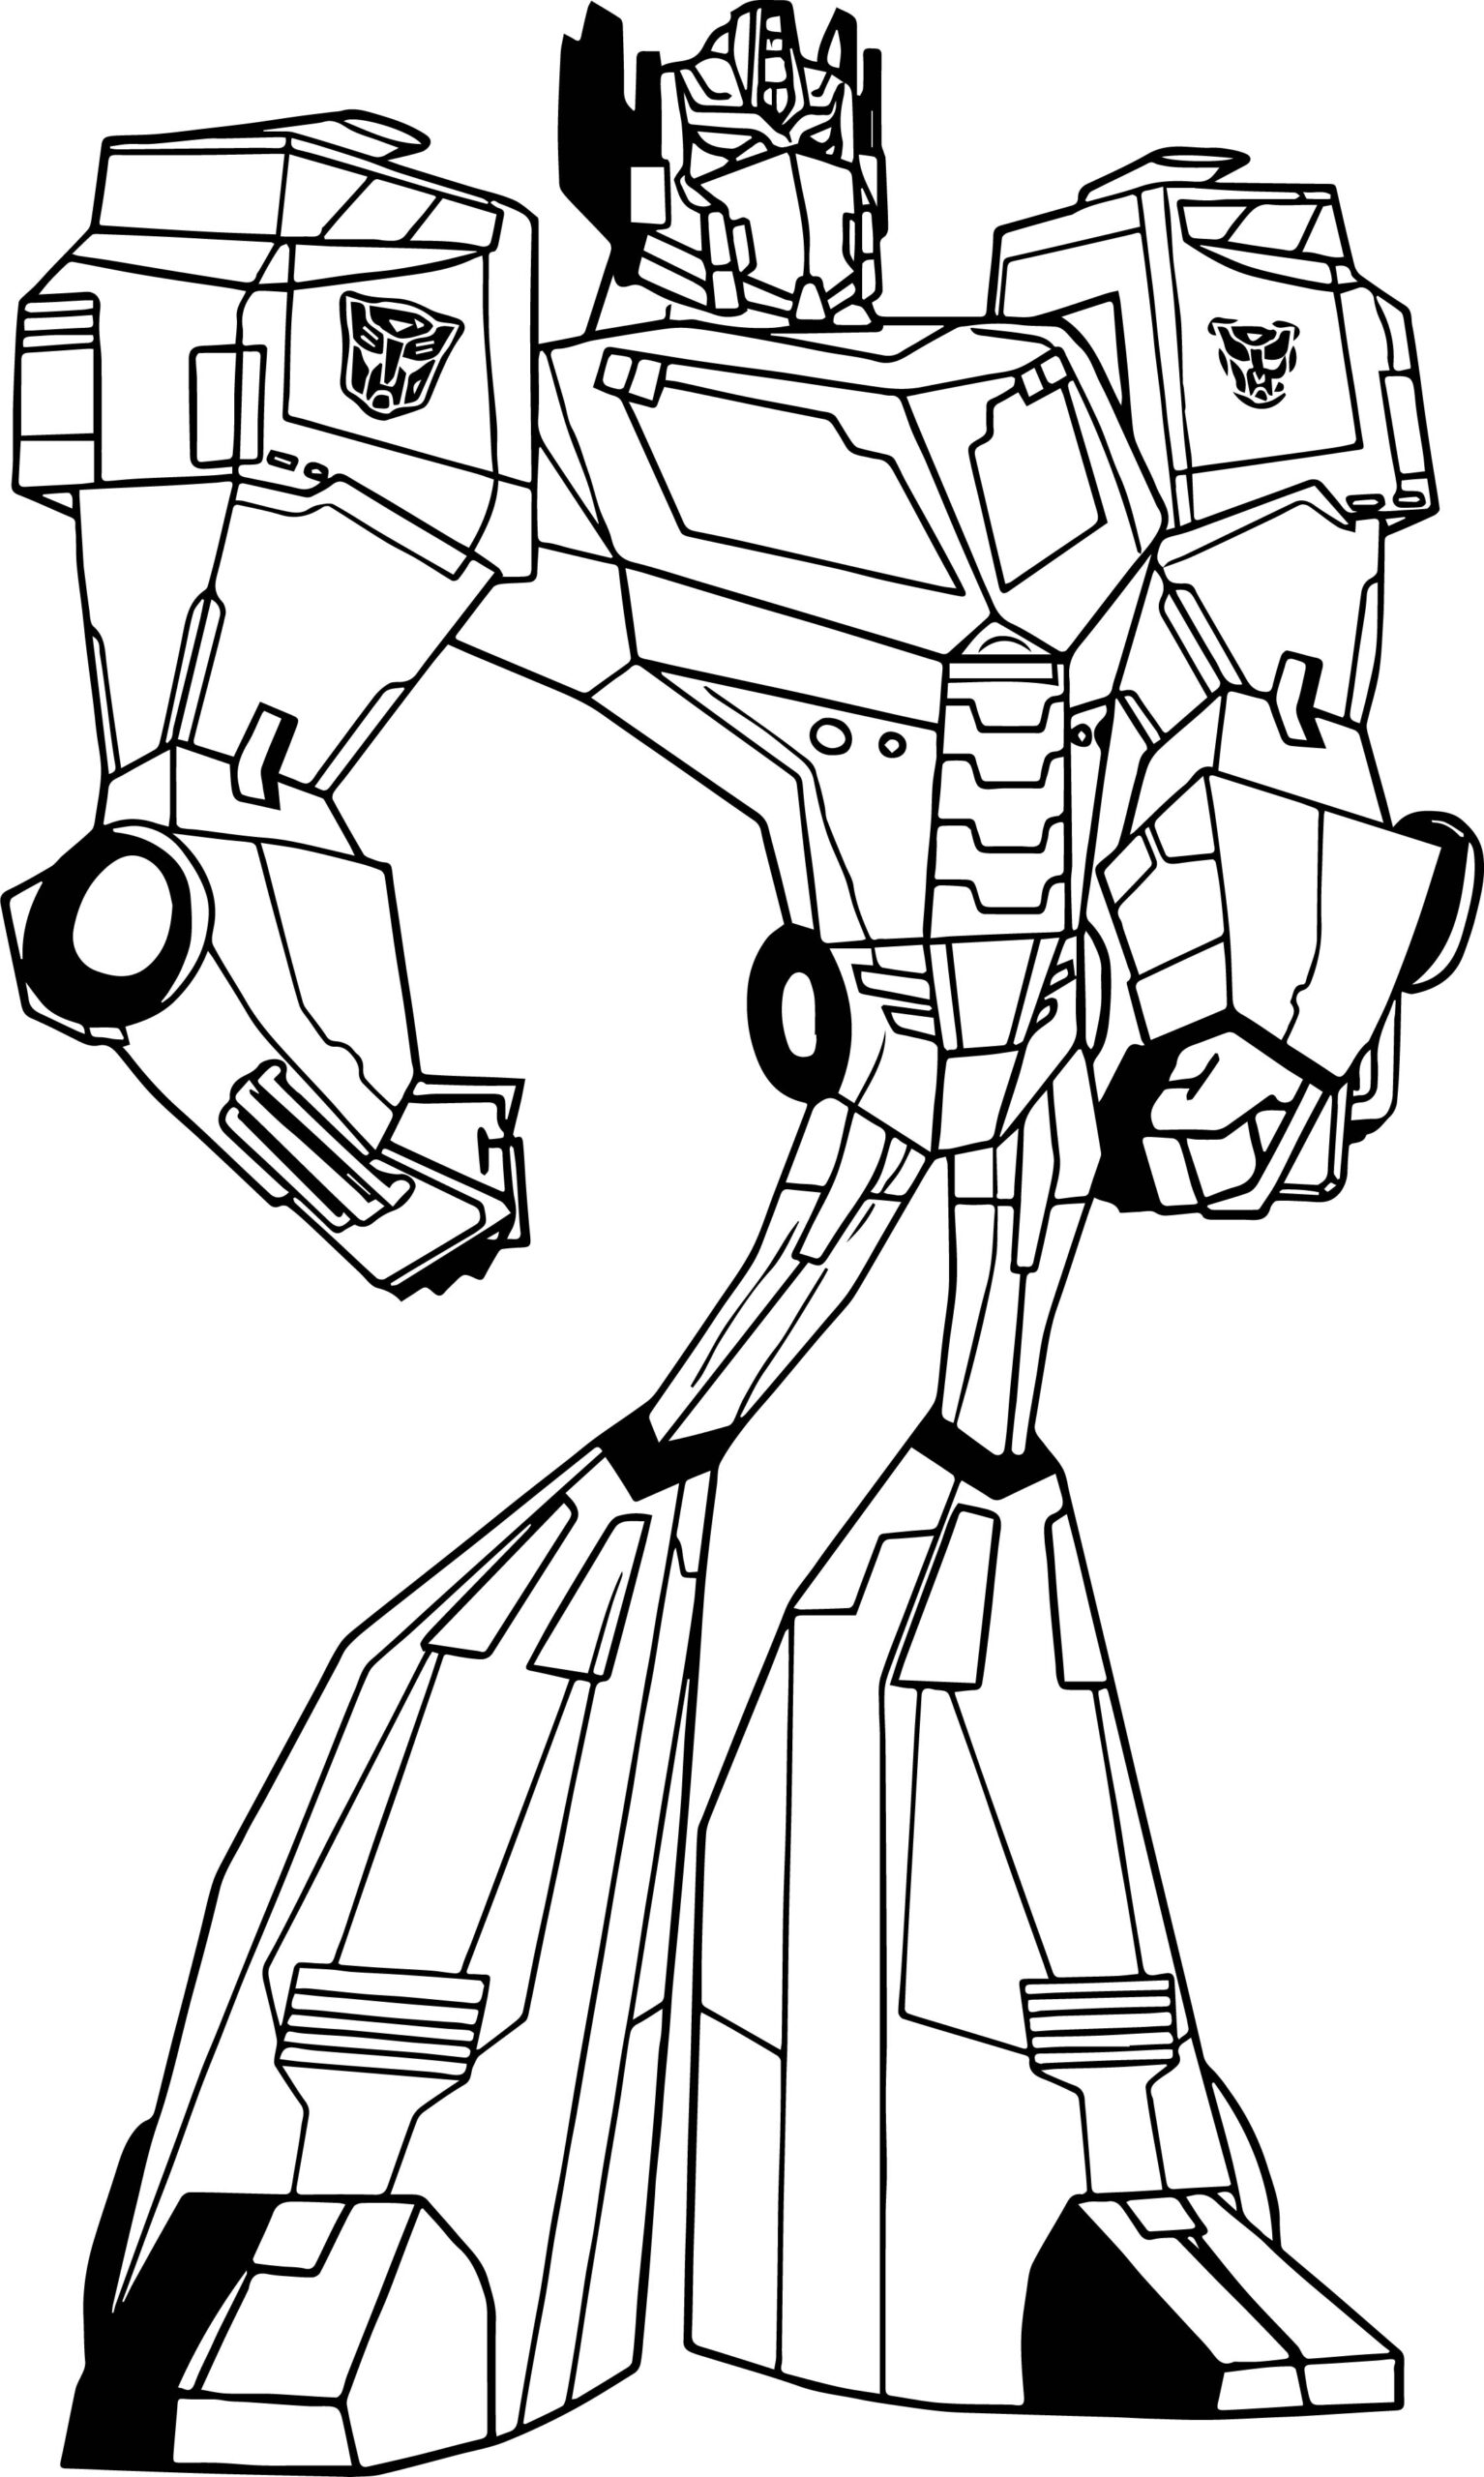 Transformers Drawing At Getdrawings | Free Download serapportantà Coloriage Transformers Optimus Prime A Imprimer